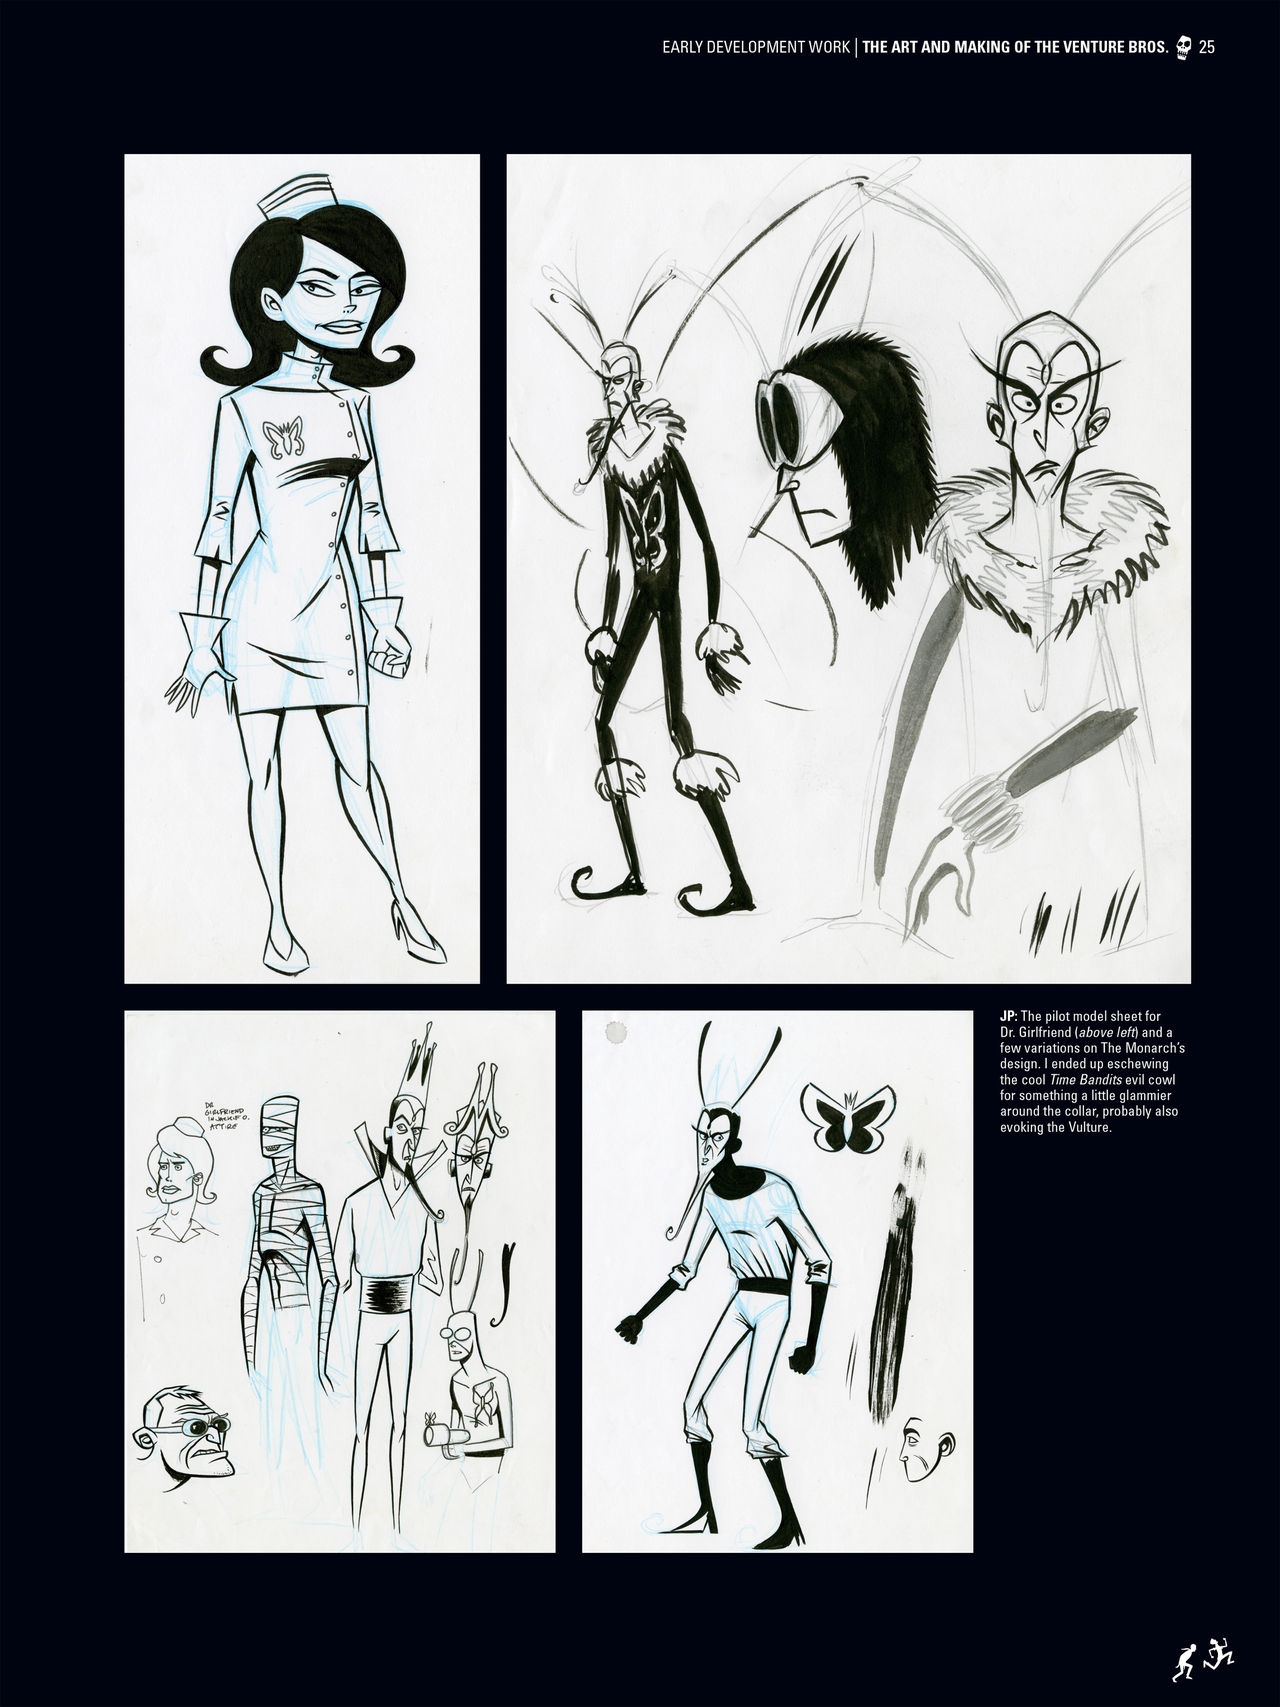 Couple Go Team Venture! The Art And Making Of The Venture Bros